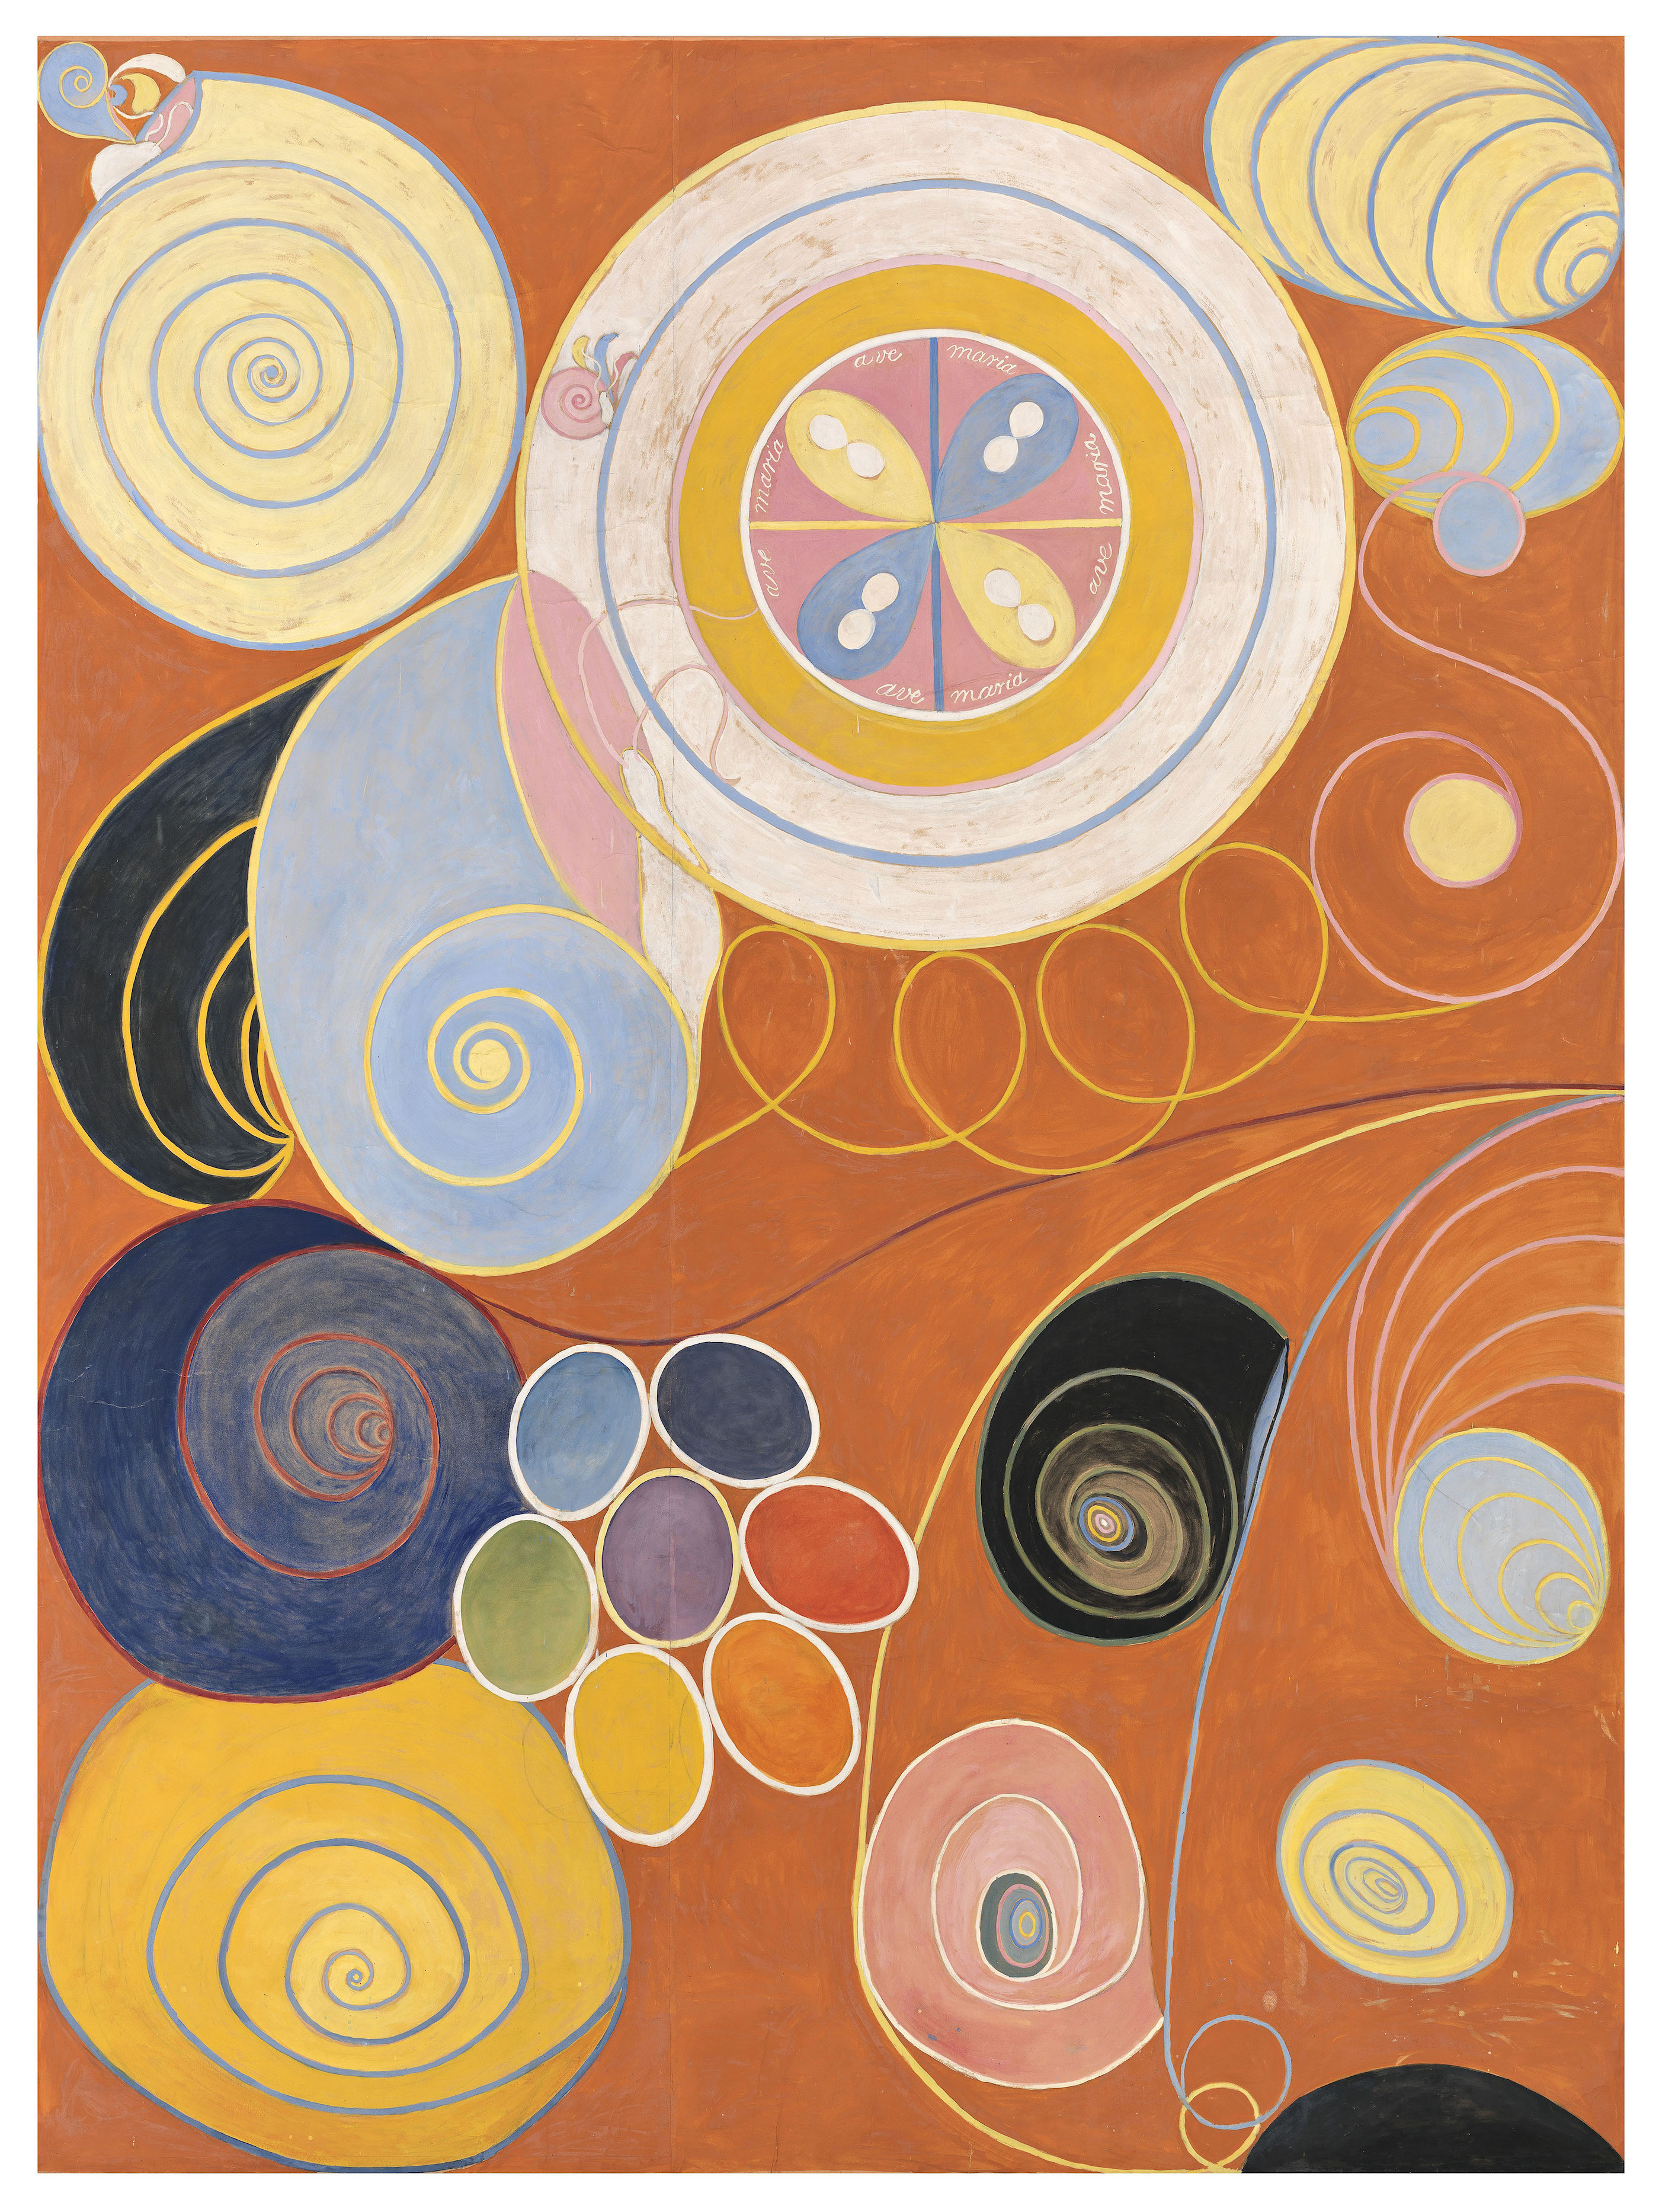 The Ten Largest, No. 3, Youth, Group IV by Hilma af Klint - 1907 Moderna Museet